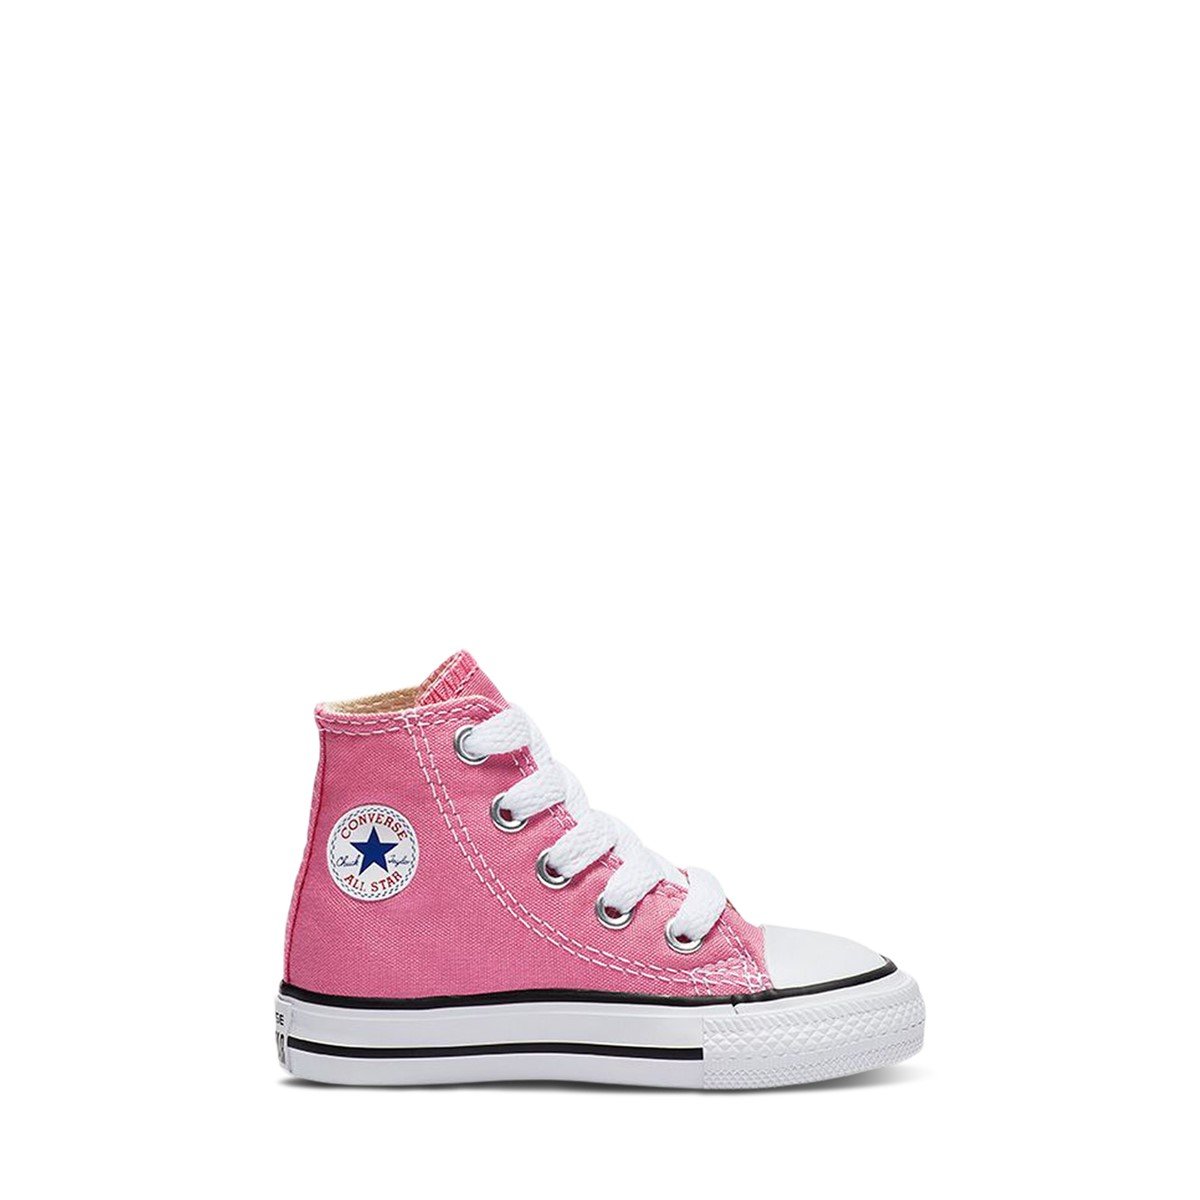 Toddler's Chuck Taylor Hi Sneakers in Pink